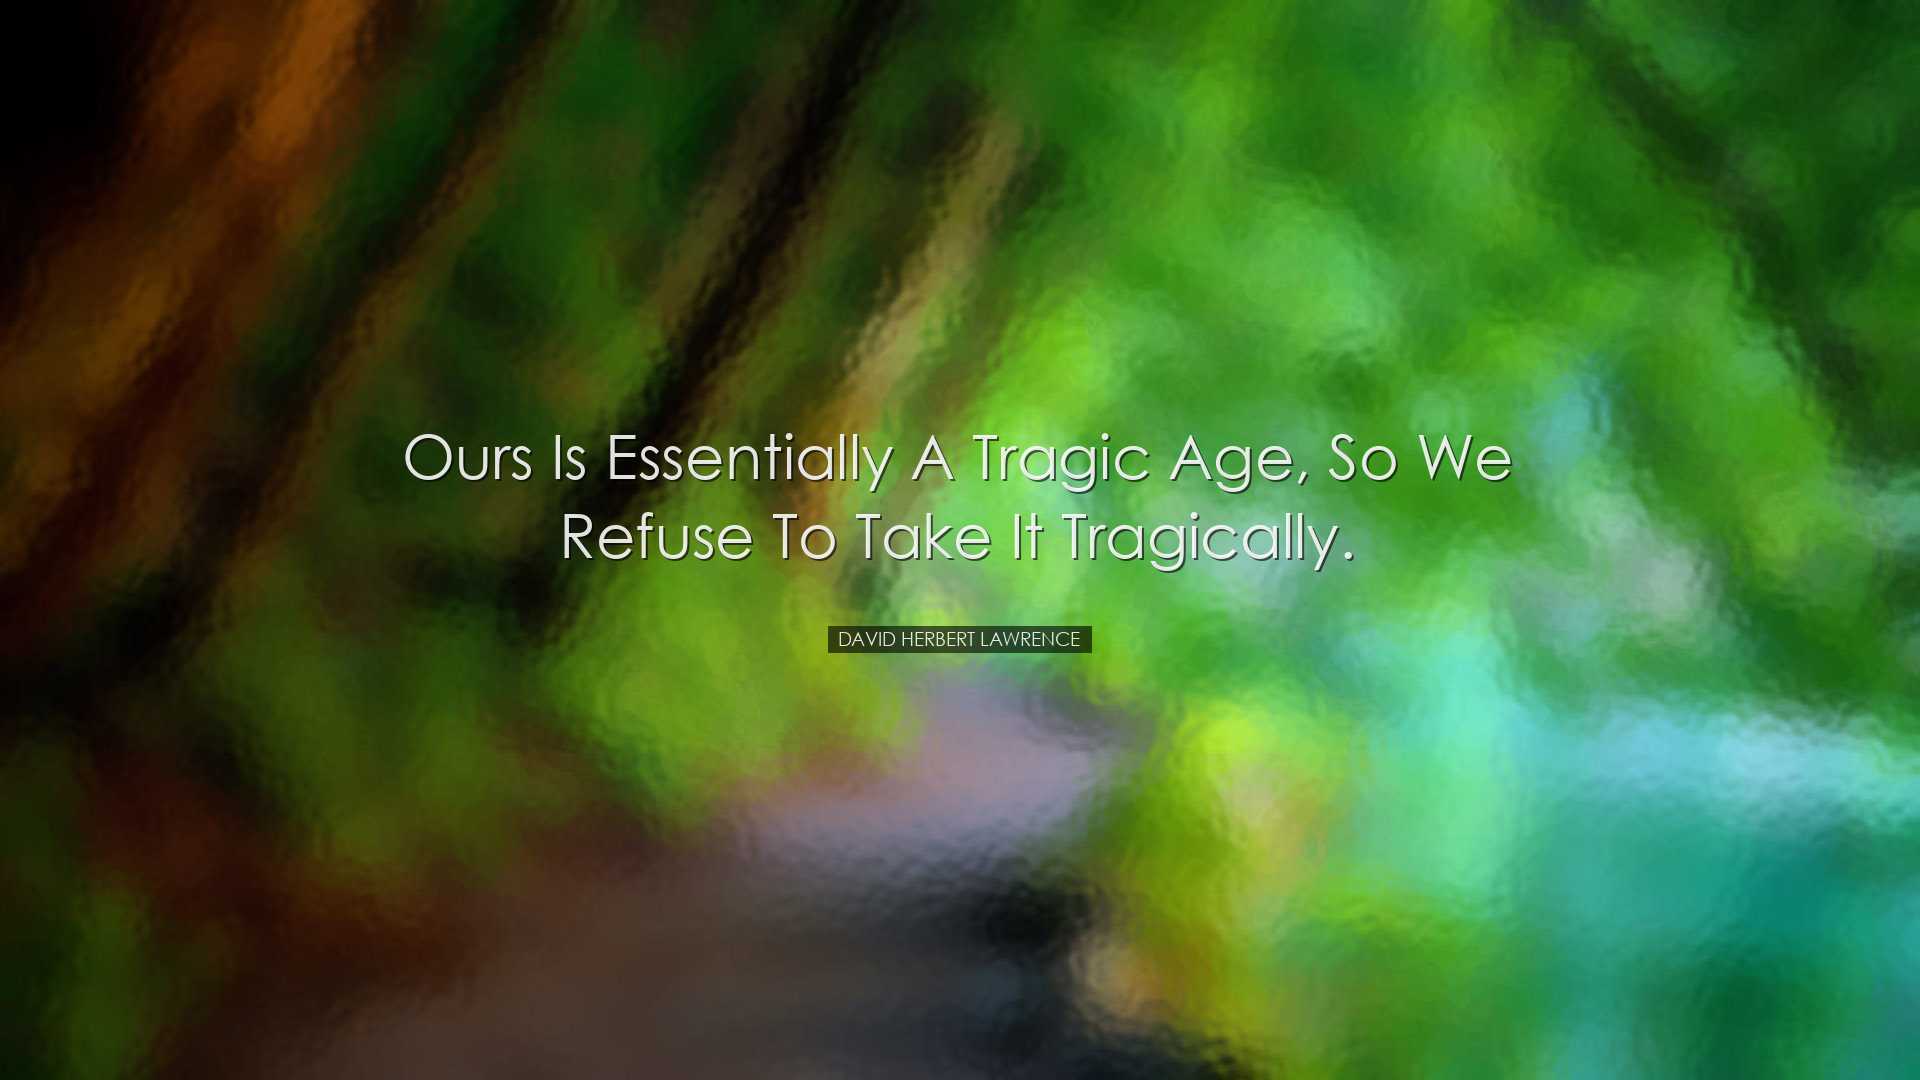 Ours is essentially a tragic age, so we refuse to take it tragical